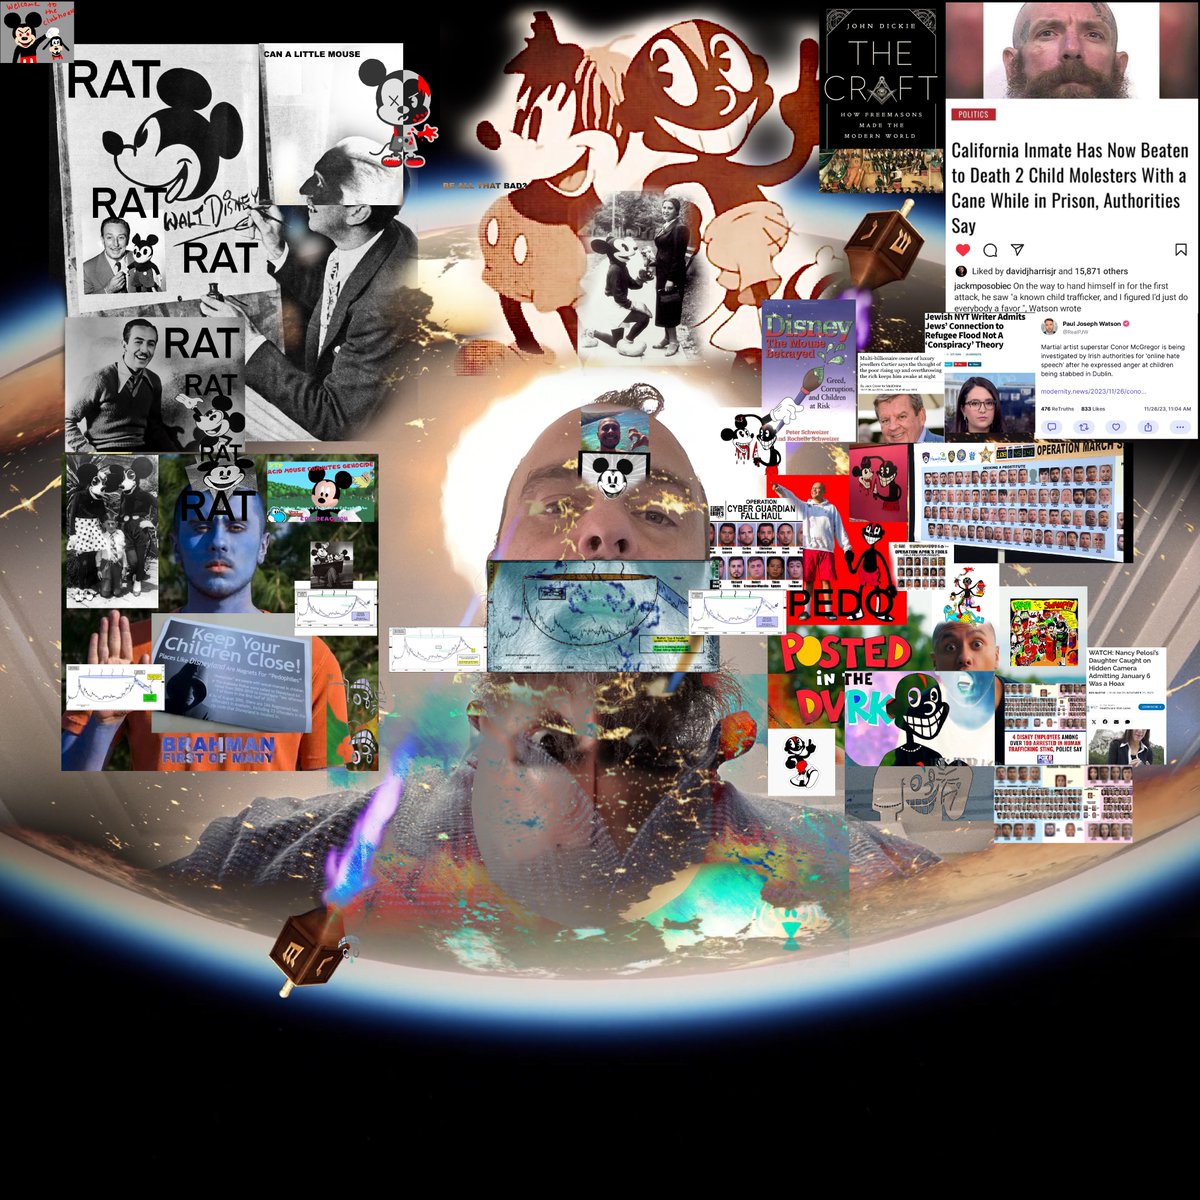 BIG DADDY BIG DARKIE
BIG RAT LIL DARKIE
CUT POWER TO ALL RIOT CITIES PERMANENTLY
GLOBAL LIGHTS OUT CURFEW FULL MOON FEVER
EACH PASS OF EARTH UNDER MY FEET GLOBAL LIGHTS OUT AIR WARDEN IR LINGER HOURS DIRECT ALL BLOCKCHAIN LEO.MILSPEC GANGBANG MARKED BEAST GLOBAL RICO SINGULARITY